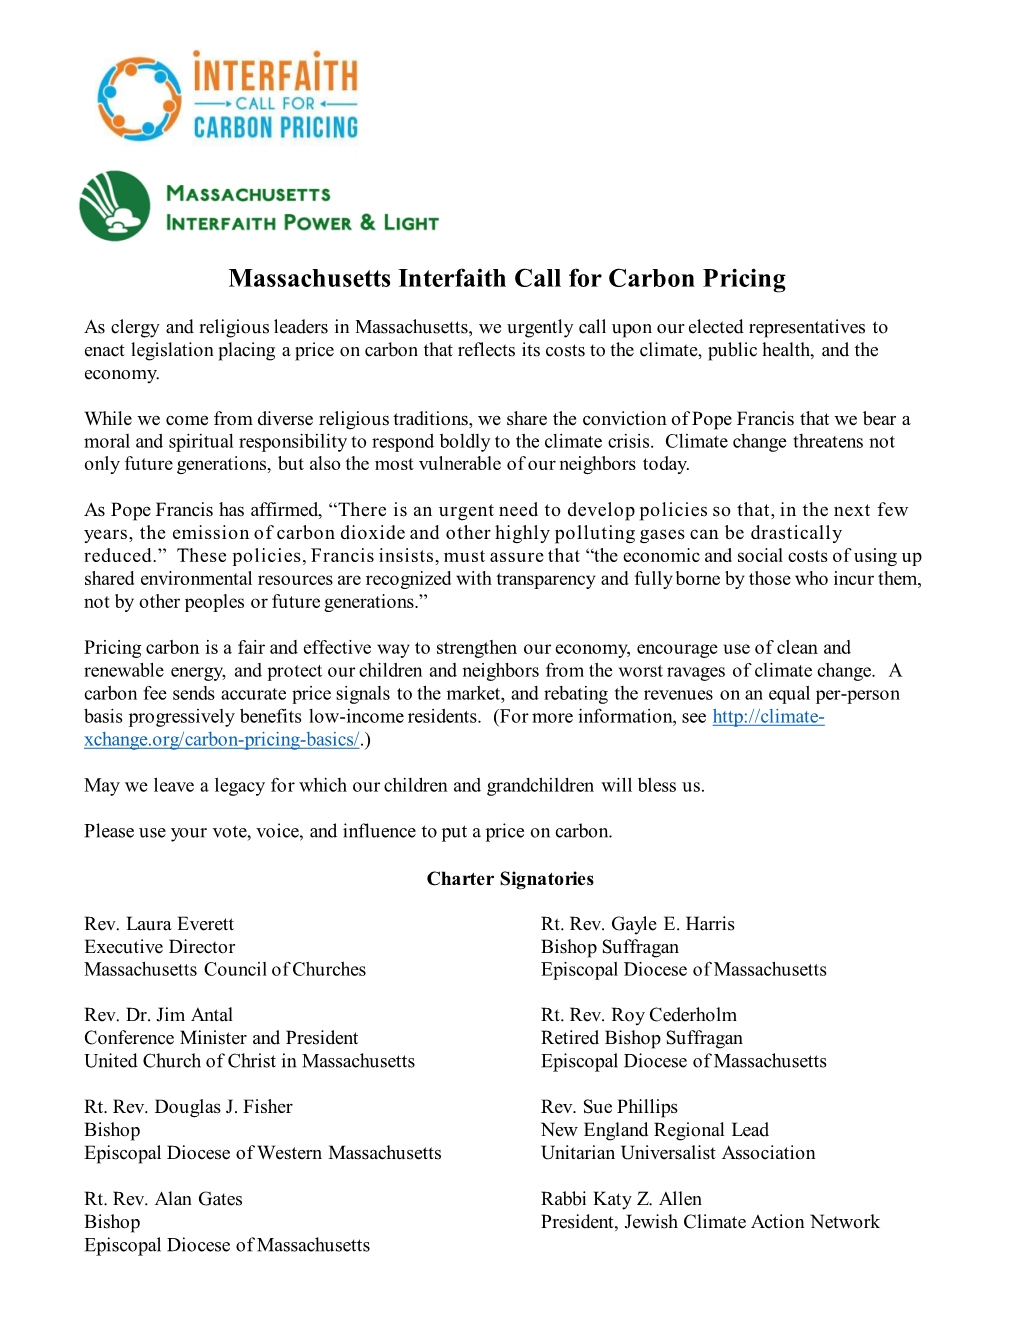 Massachusetts Interfaith Call for Carbon Pricing